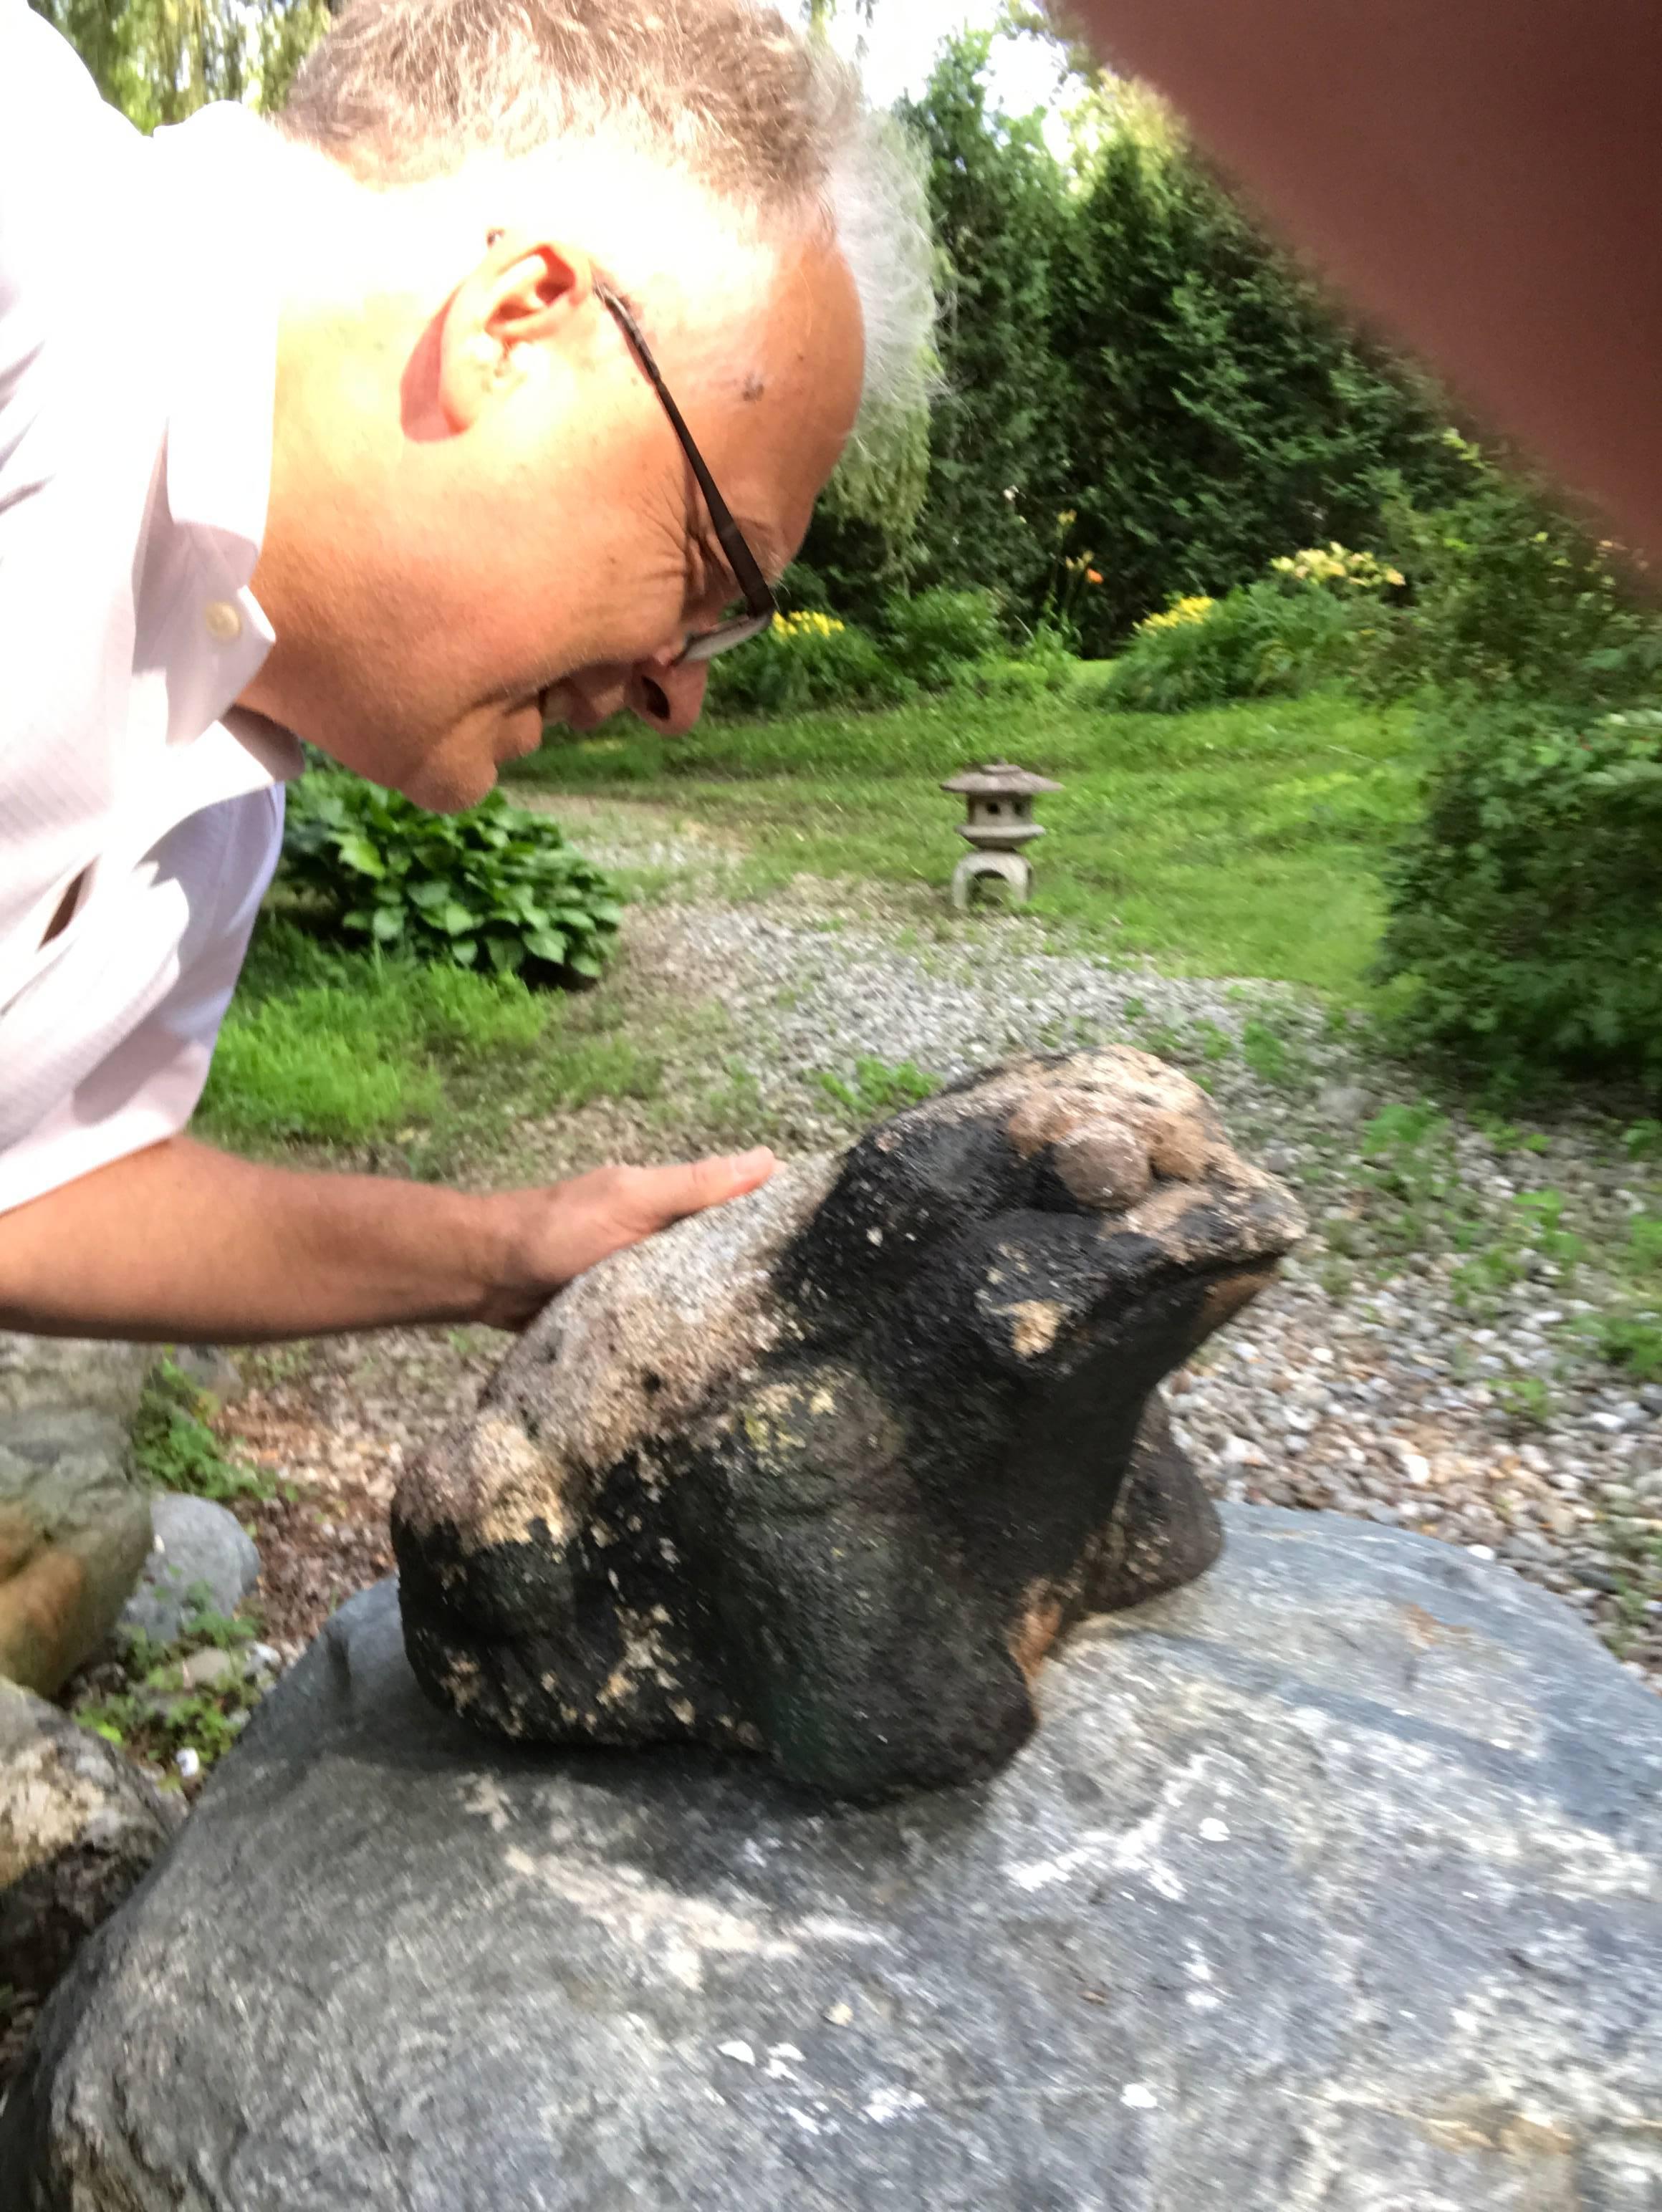 A delightful opportunity to acquire a rare giant Japanese hand-carved stone frog sculpture fresh from an old Shiga Japan garden and dating to the early 20th century. Look at the fine carving detail and handsome dark patina from significant age and